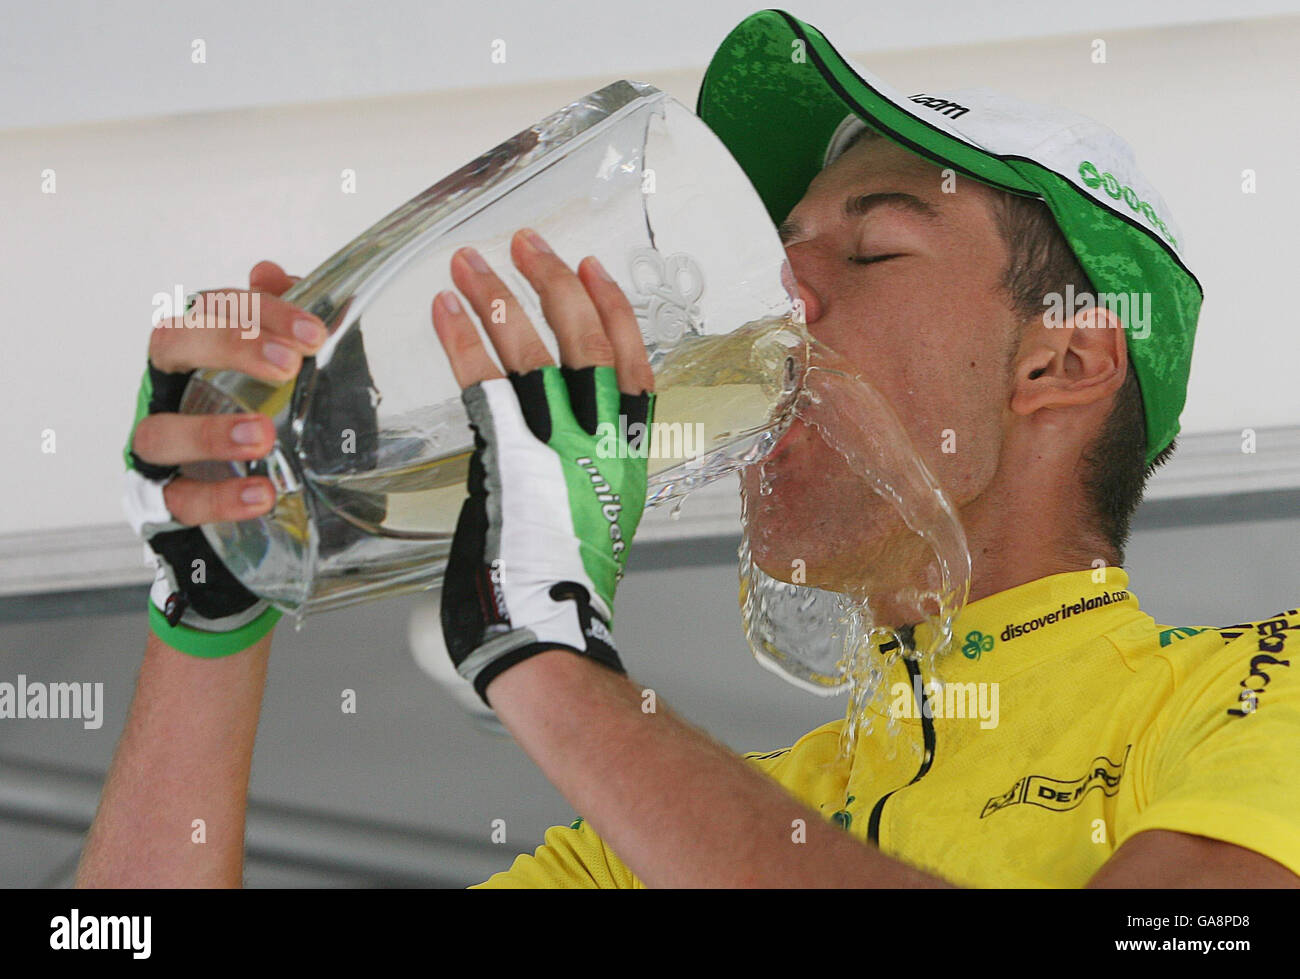 Stijn Vandengbergh winner, of the inaugural Tour of Ireland cycle race, drinks champagne from his trophy after a gruelling final stage from Athlone to Dublin . Stock Photo